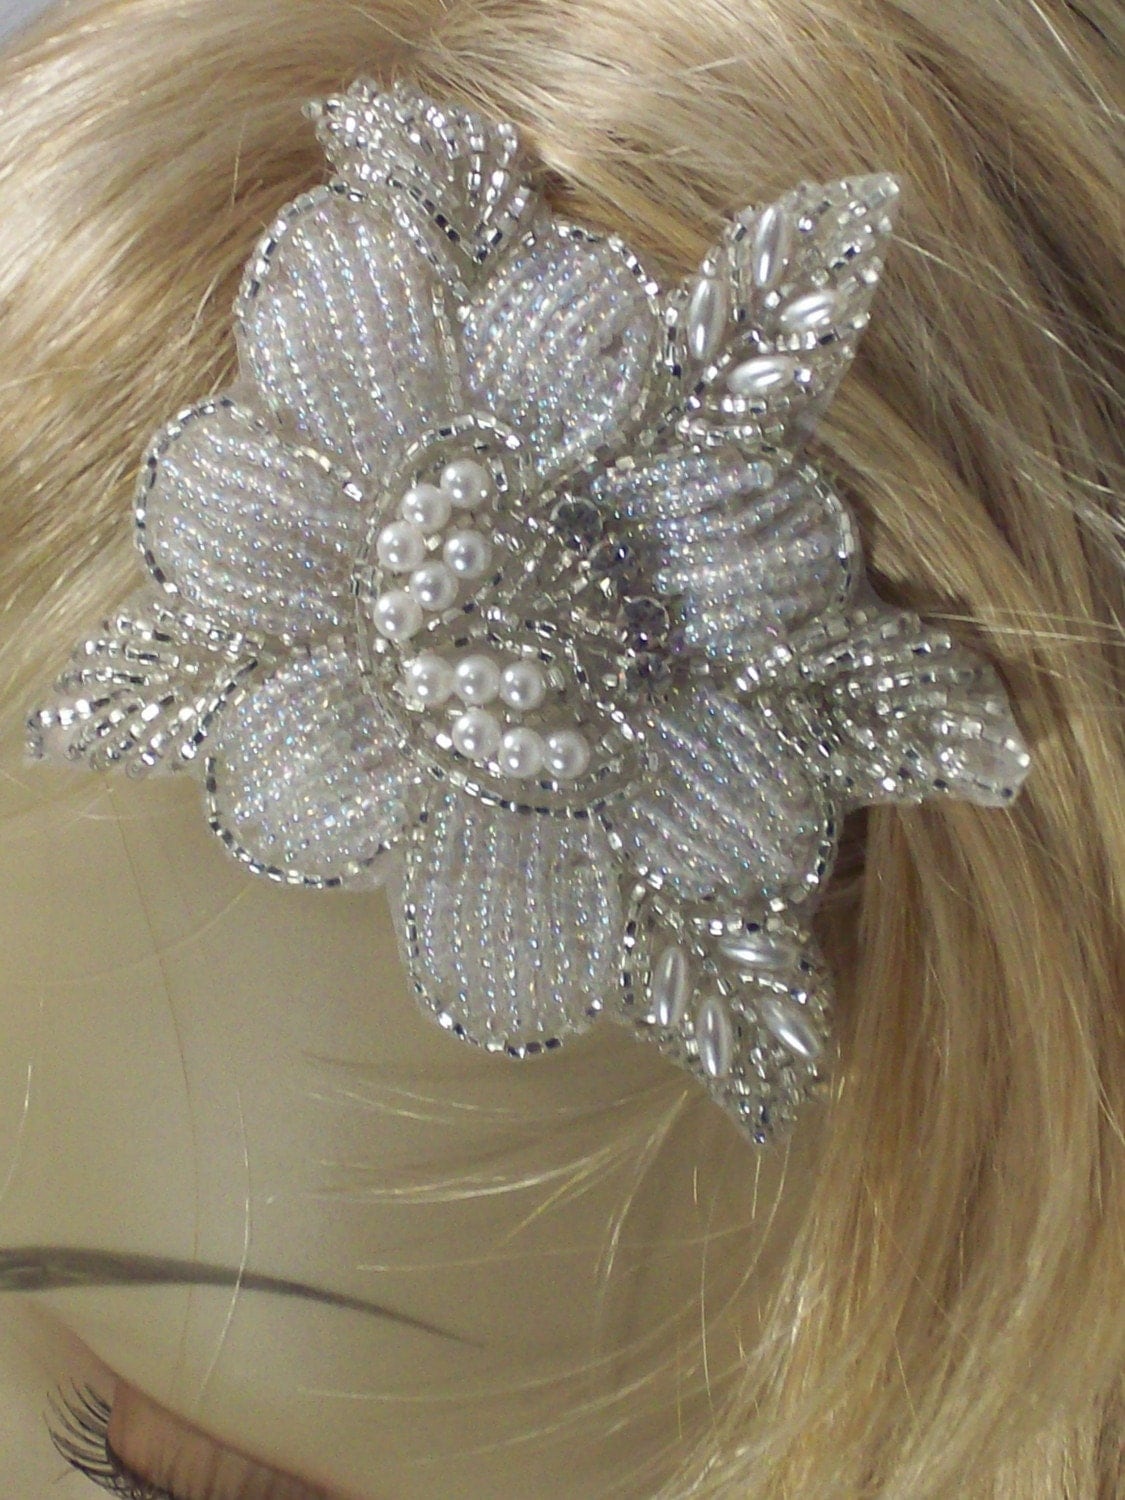 Vintage Silver and White Flower Applique with Swarovski Crystals - On Hair Comb - LAST ONE LADIES